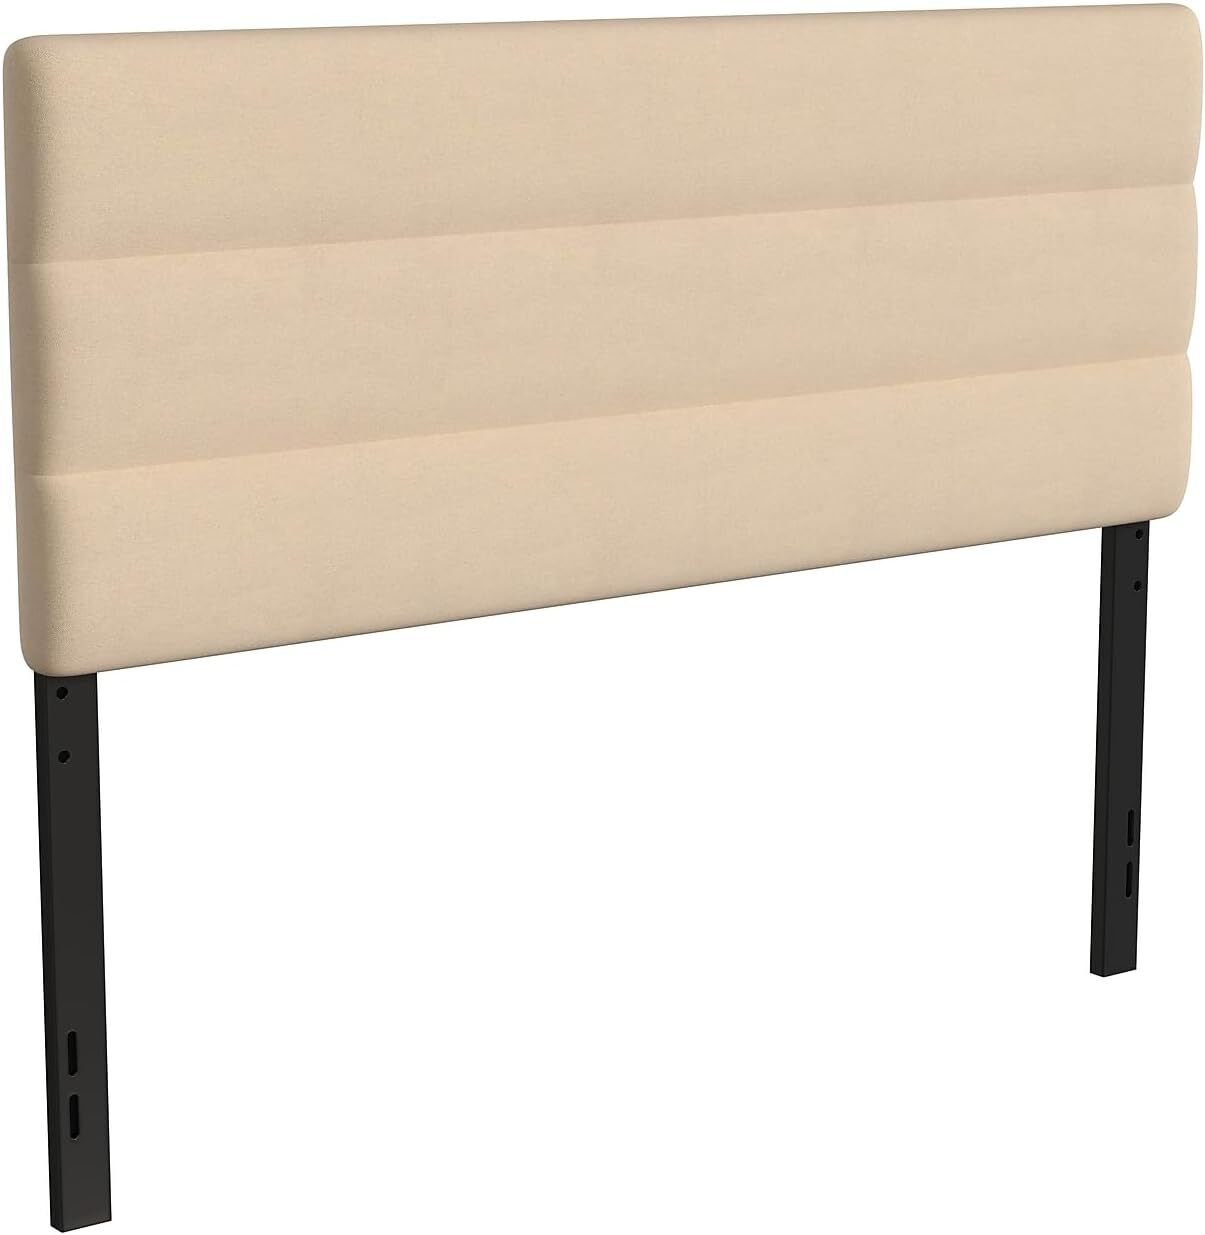 Flash Furniture Paxton Upholstered Headboard - Channel Stitched Queen, Cream